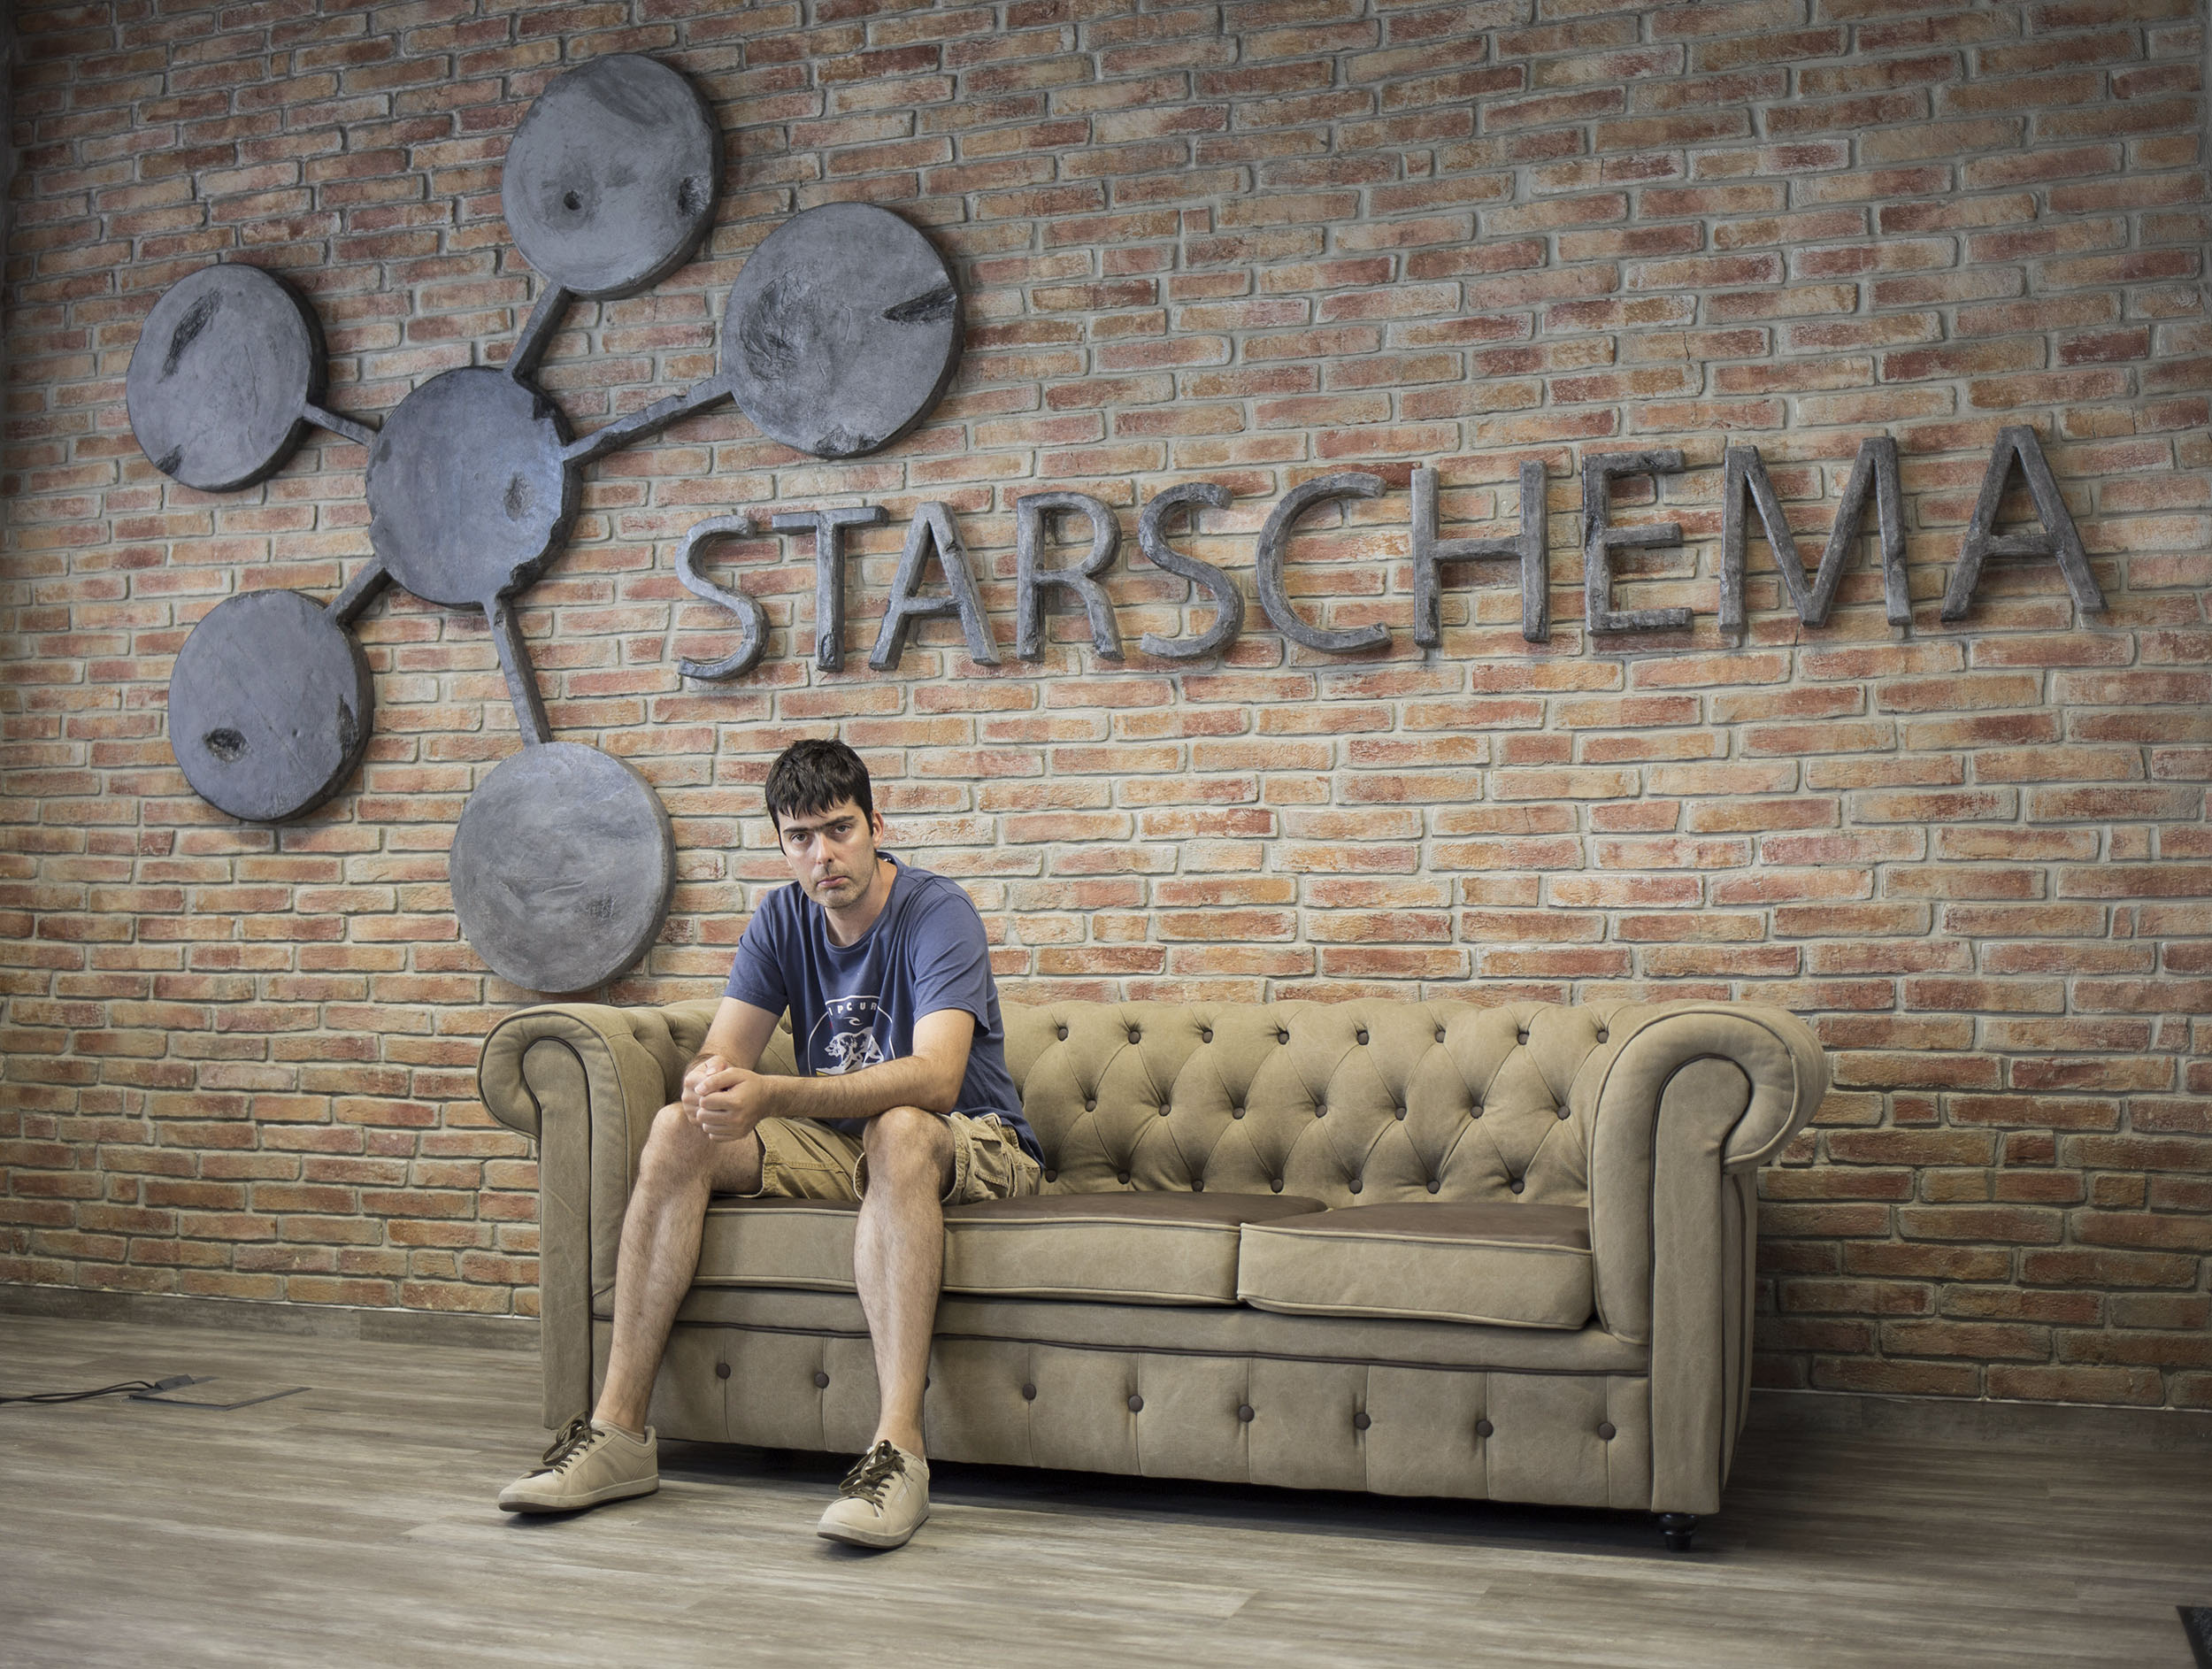 Fast-growing Data Firm Starschema Aims to Double Staff, Conq...